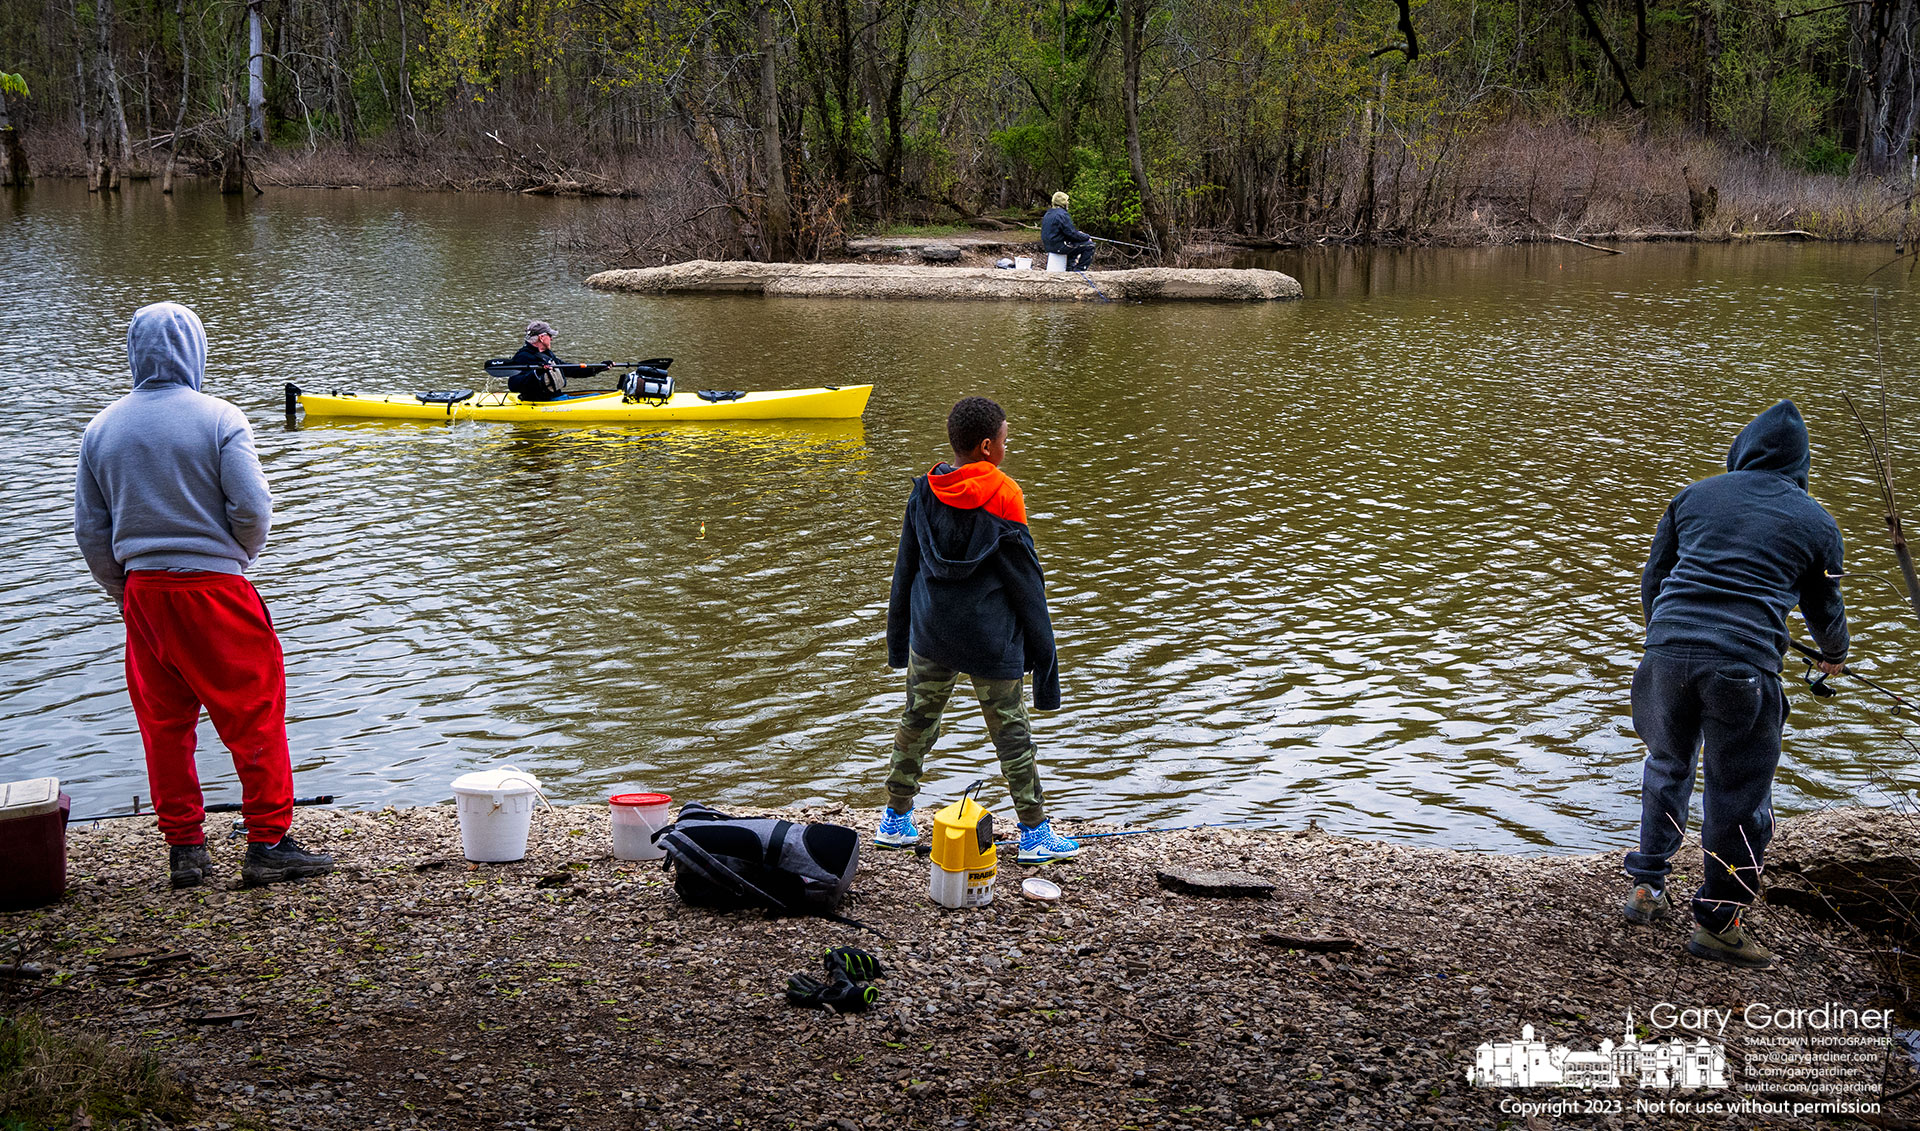 A kayaking angler glides between two sets of fishermen working the shoreline along Big Walnut Creek in Galena. My Final Photo for April 23, 2023.